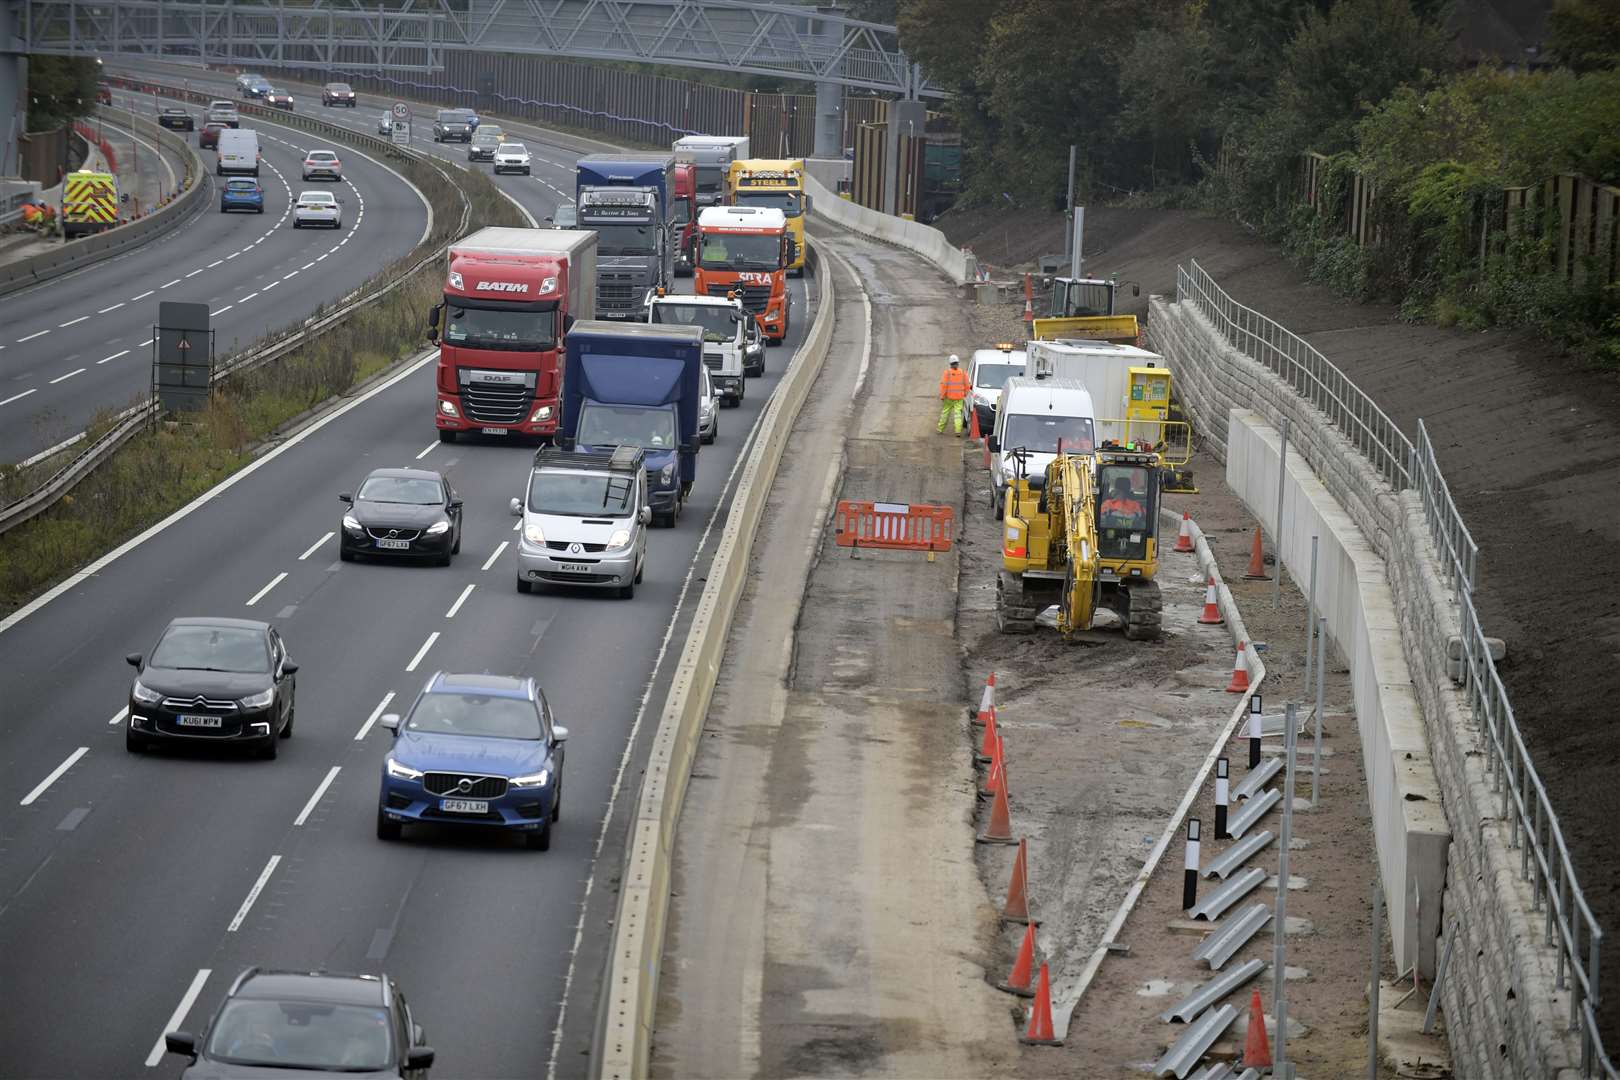 The M20 Smart Motorway is supposed to open in the coming months. Picture: Barry Goodwin